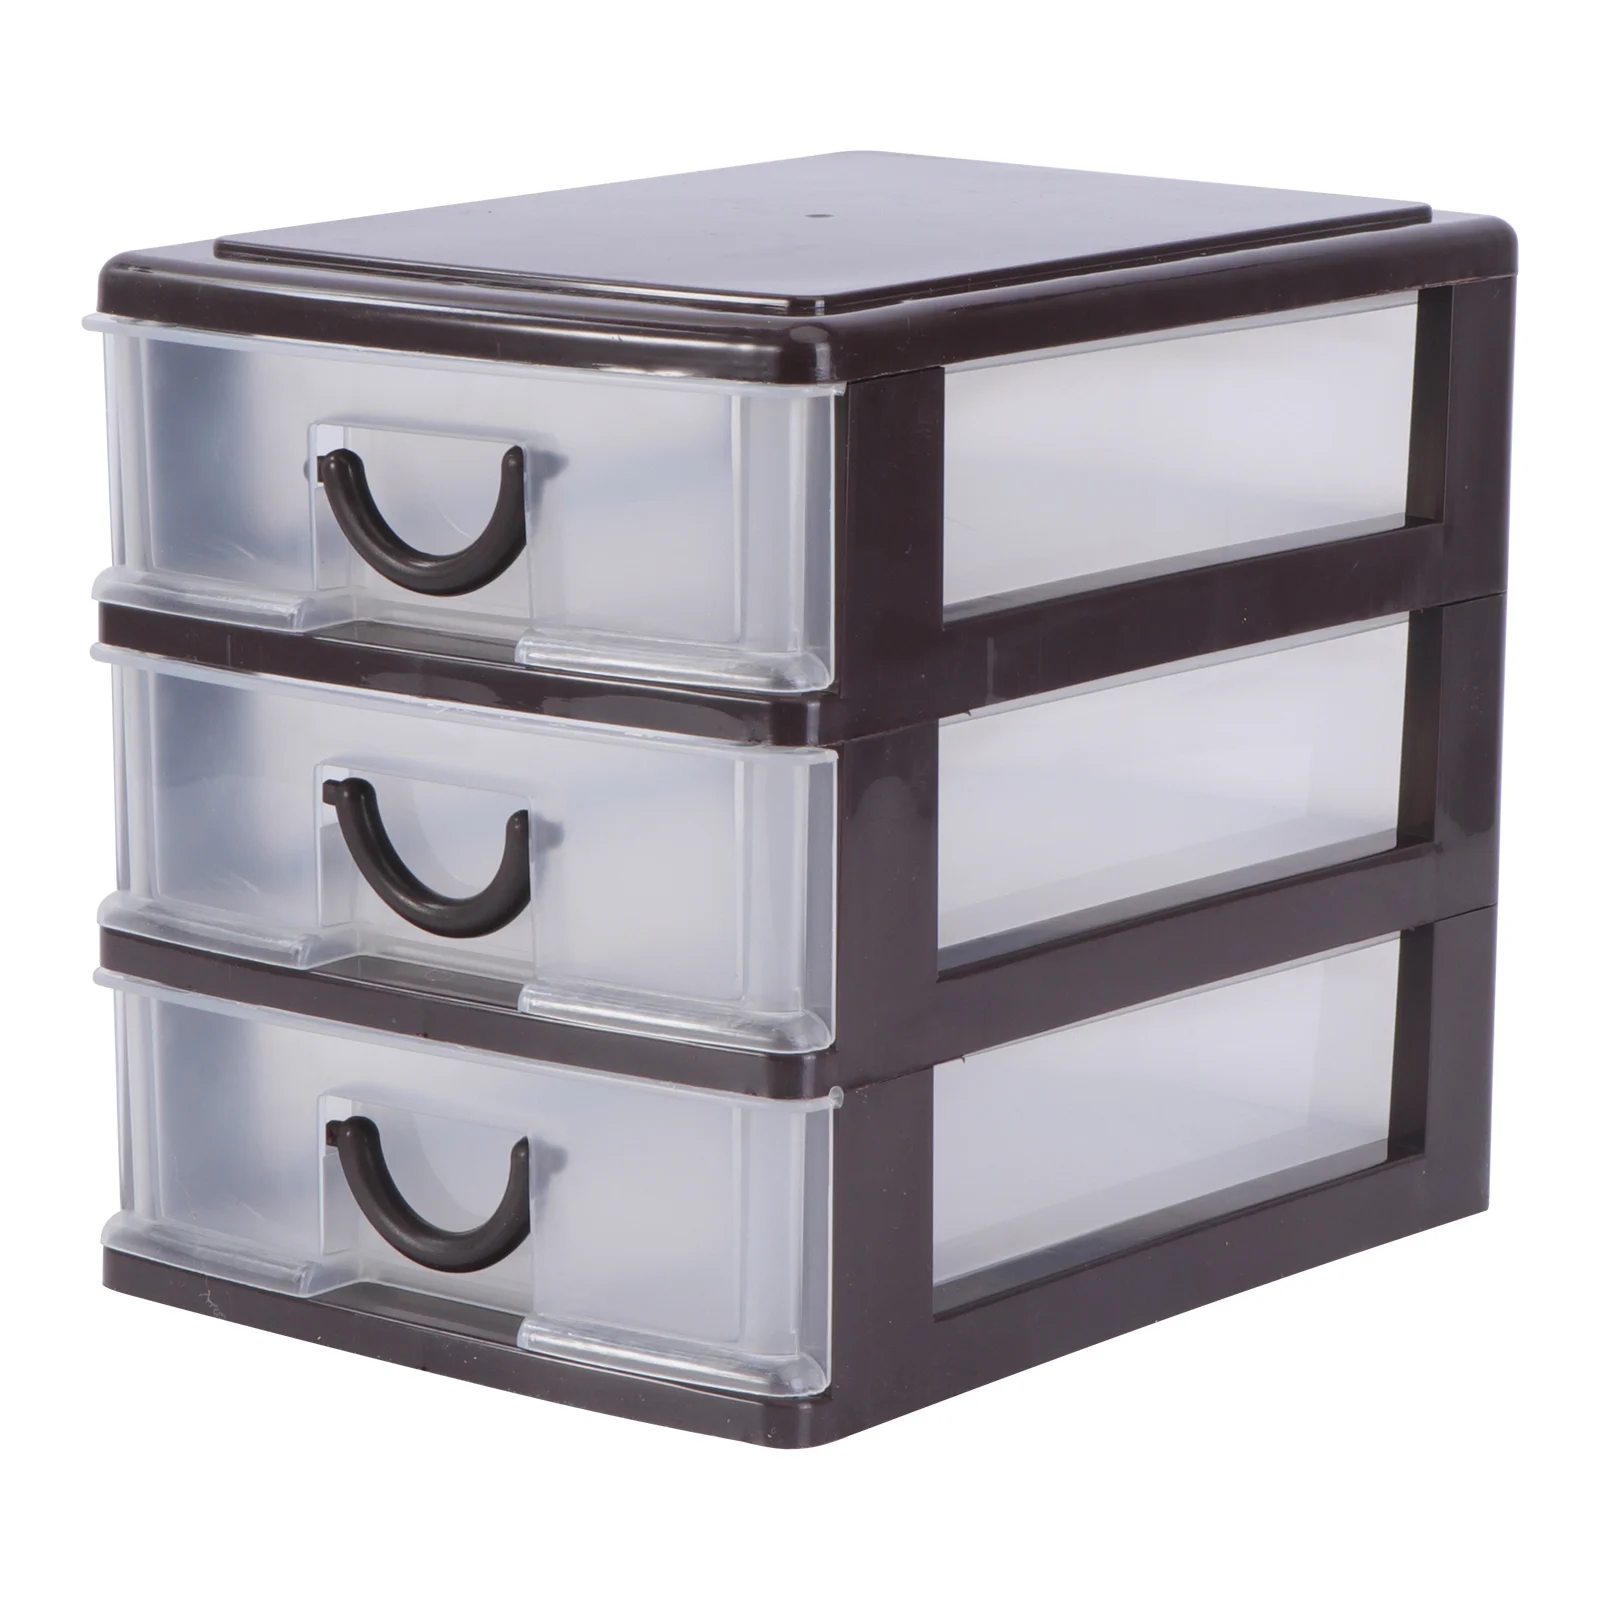 

Organizer Storage Drawer Box Drawers Desktop Plastic Desk Jewelry Cabinet Mini Container Table Case Sundries Makeup Trays